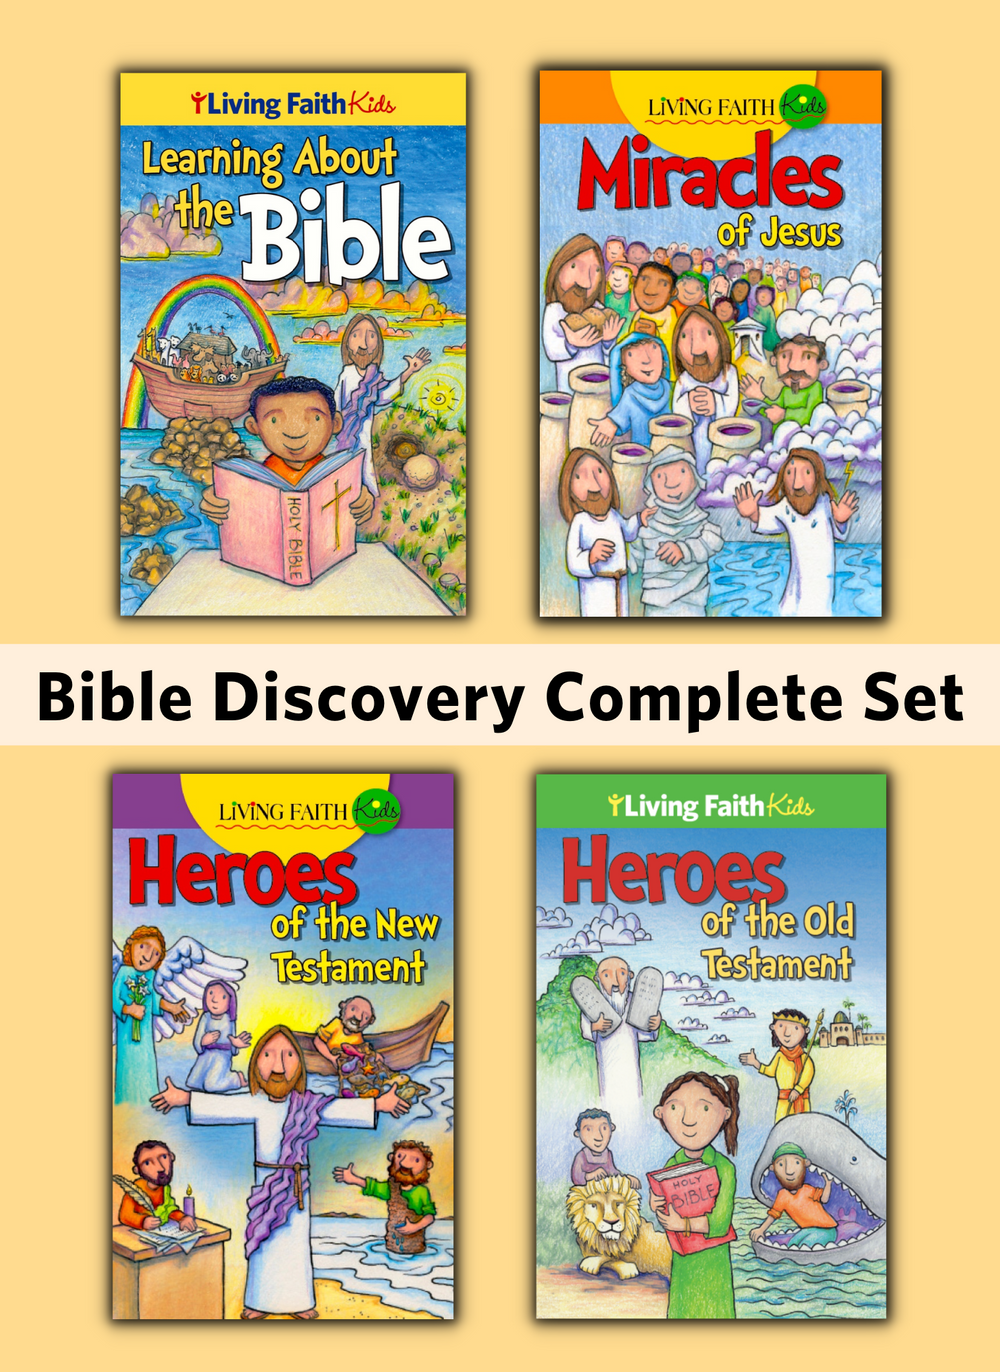 Bible Discovery Complete Set